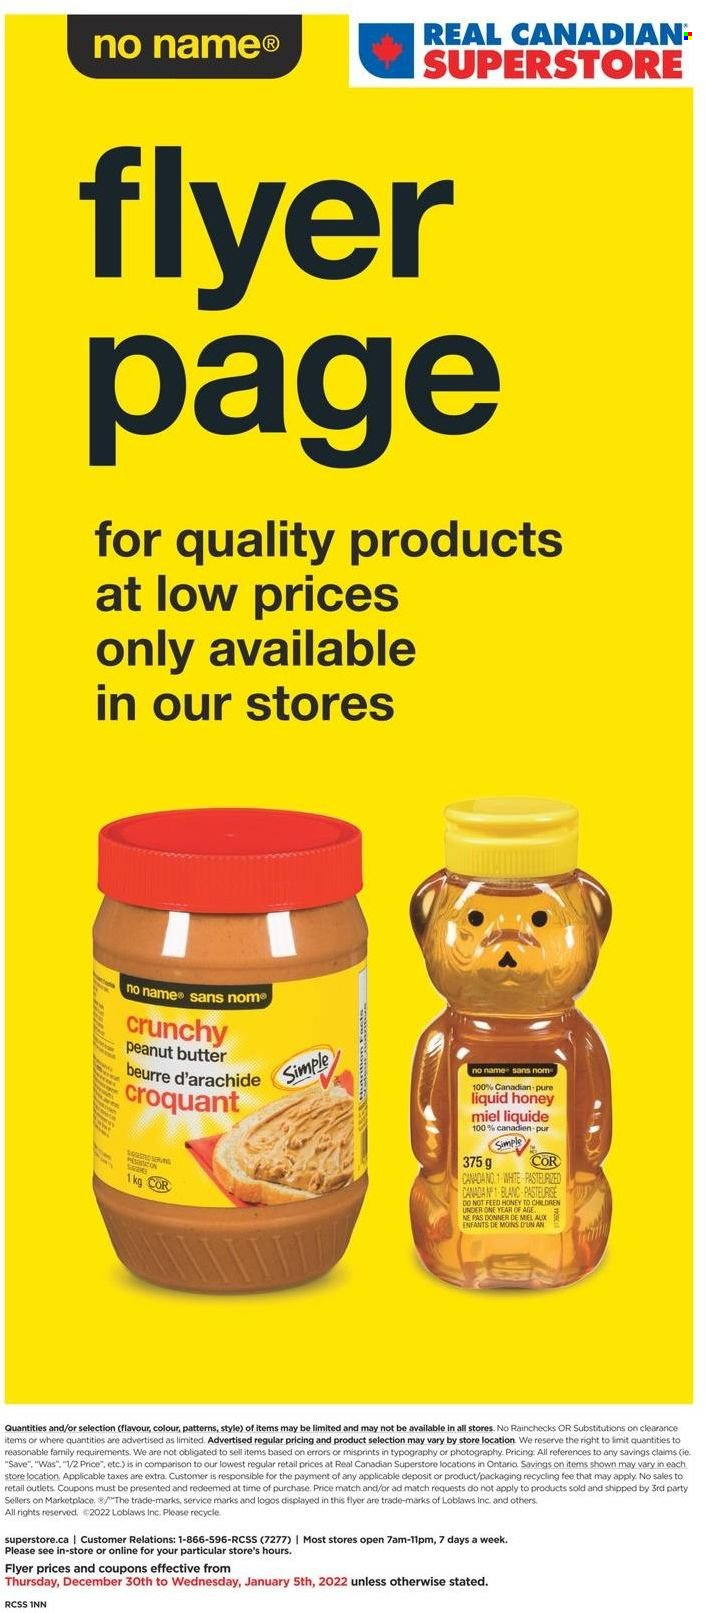 Real Canadian Superstore Flyer - December 30, 2021 - January 05, 2022 - Sales products - No Name, honey, peanut butter. Page 1.